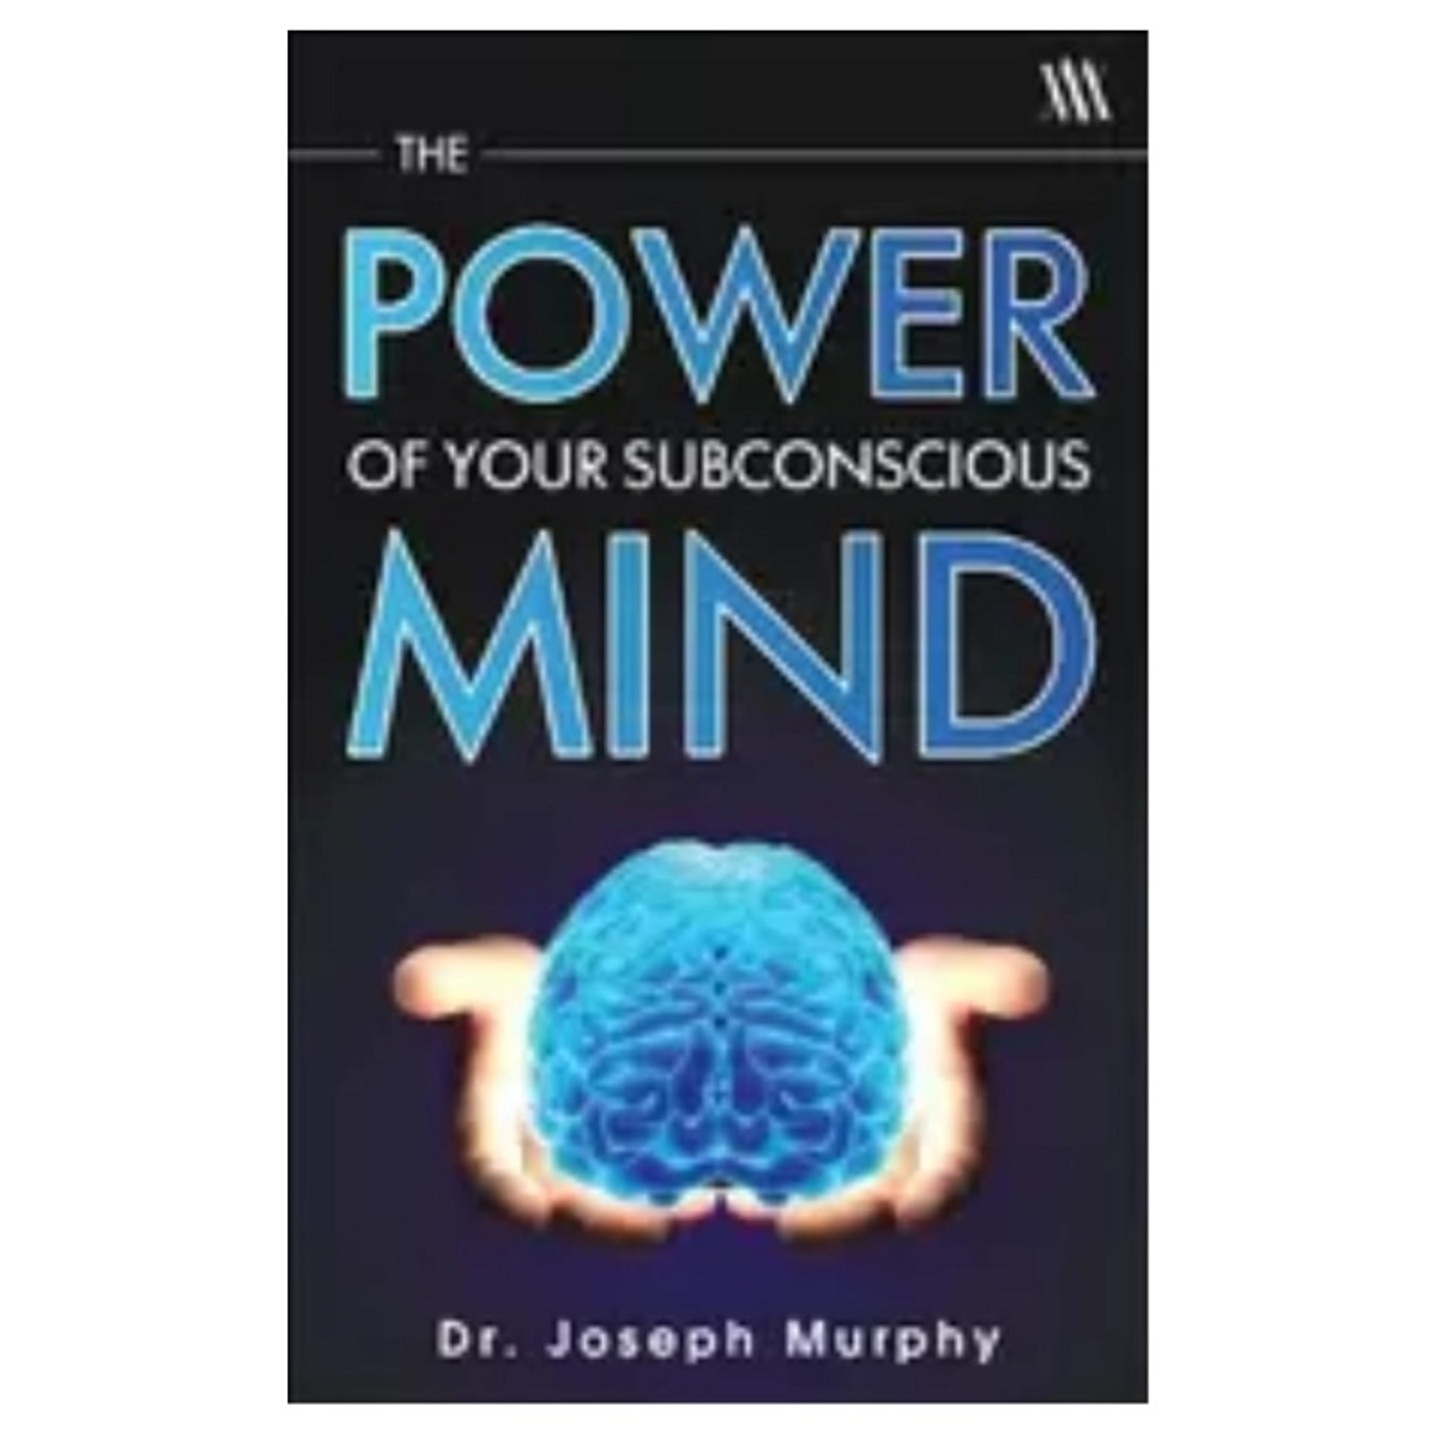 Book The Power of Your Subconscious Mind